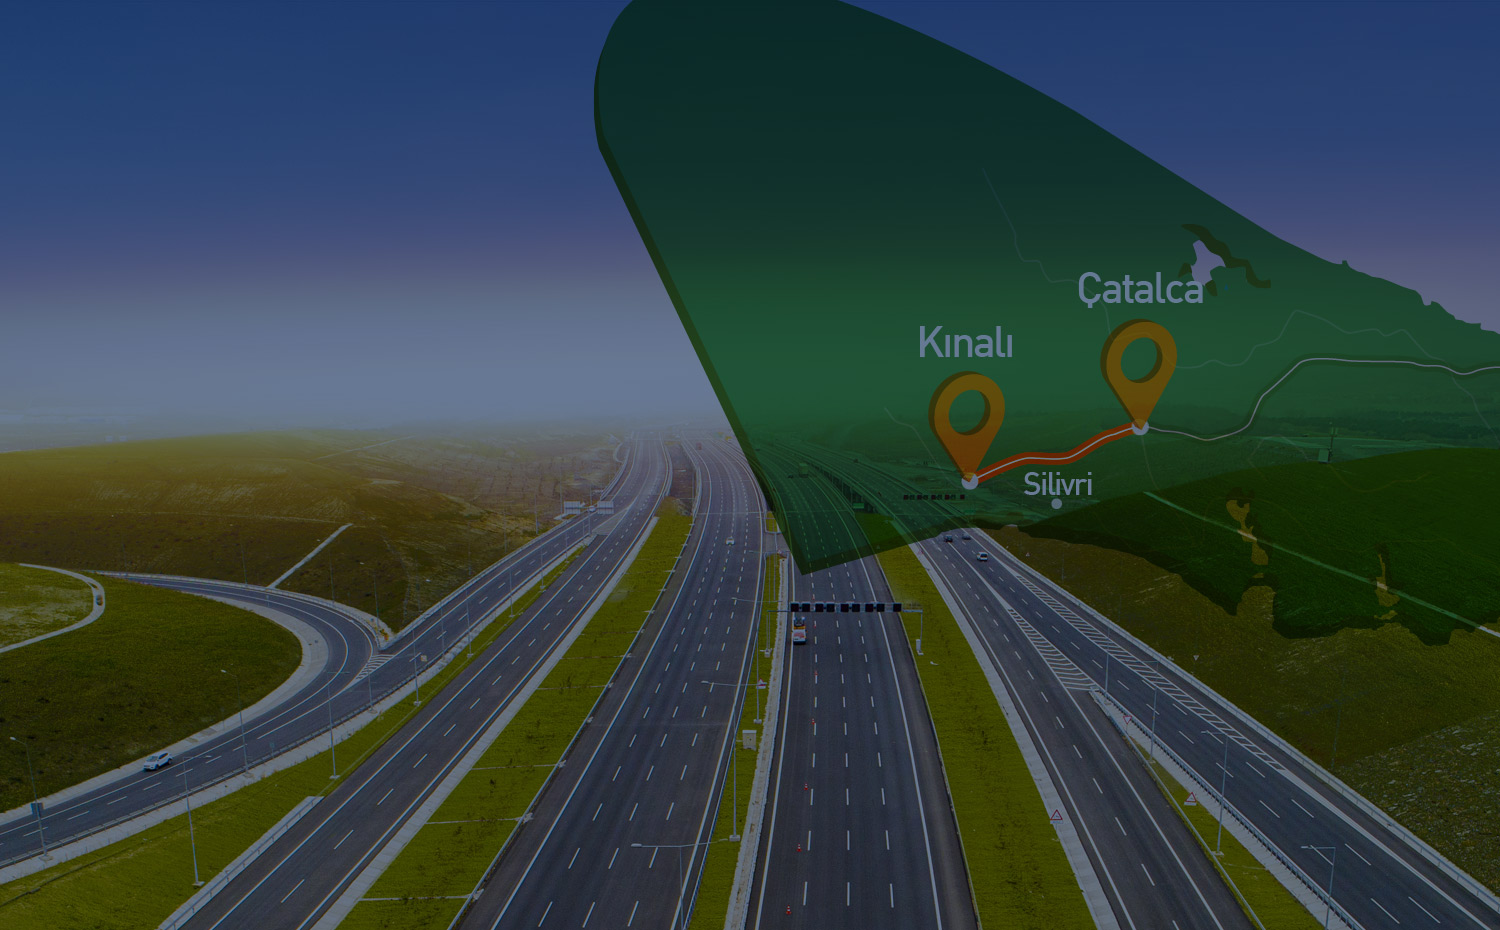 ROADS ARE OPENED OPEN, DISTANCES ARE SHORTENED

KINALI - ÇATALCA SECTION IS OPENED!
